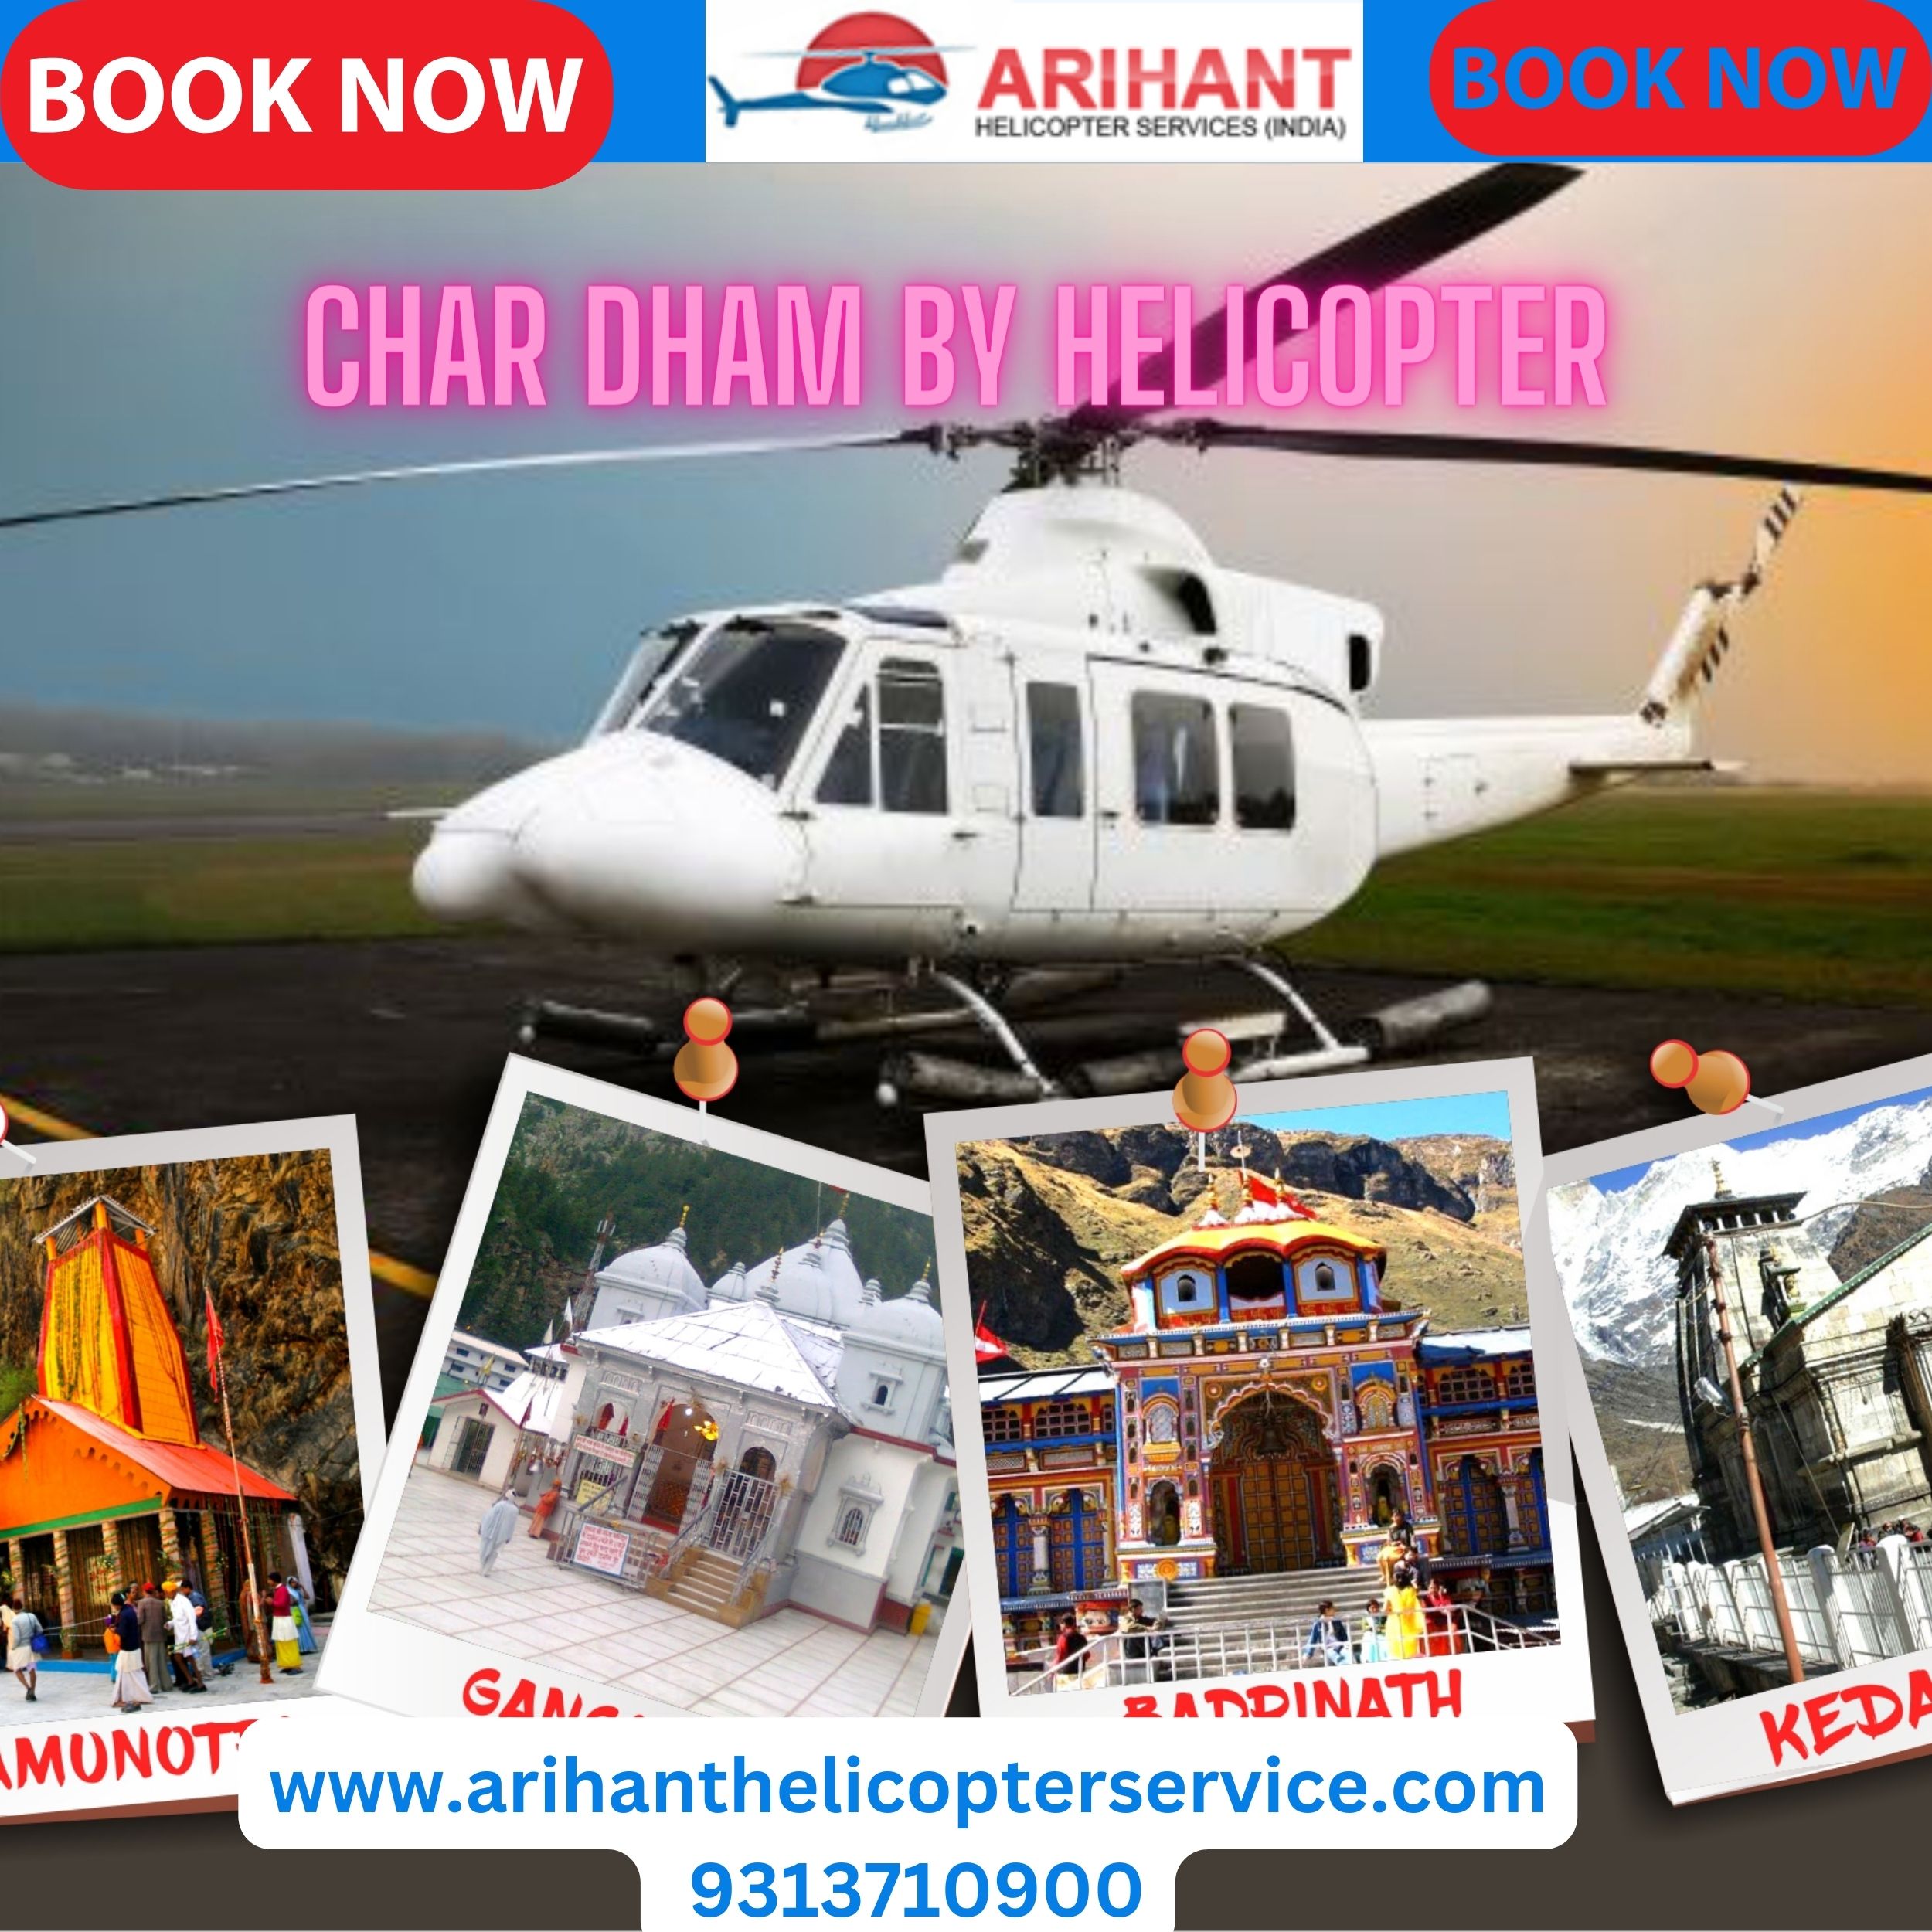  Char fham by heliopter from dehradun